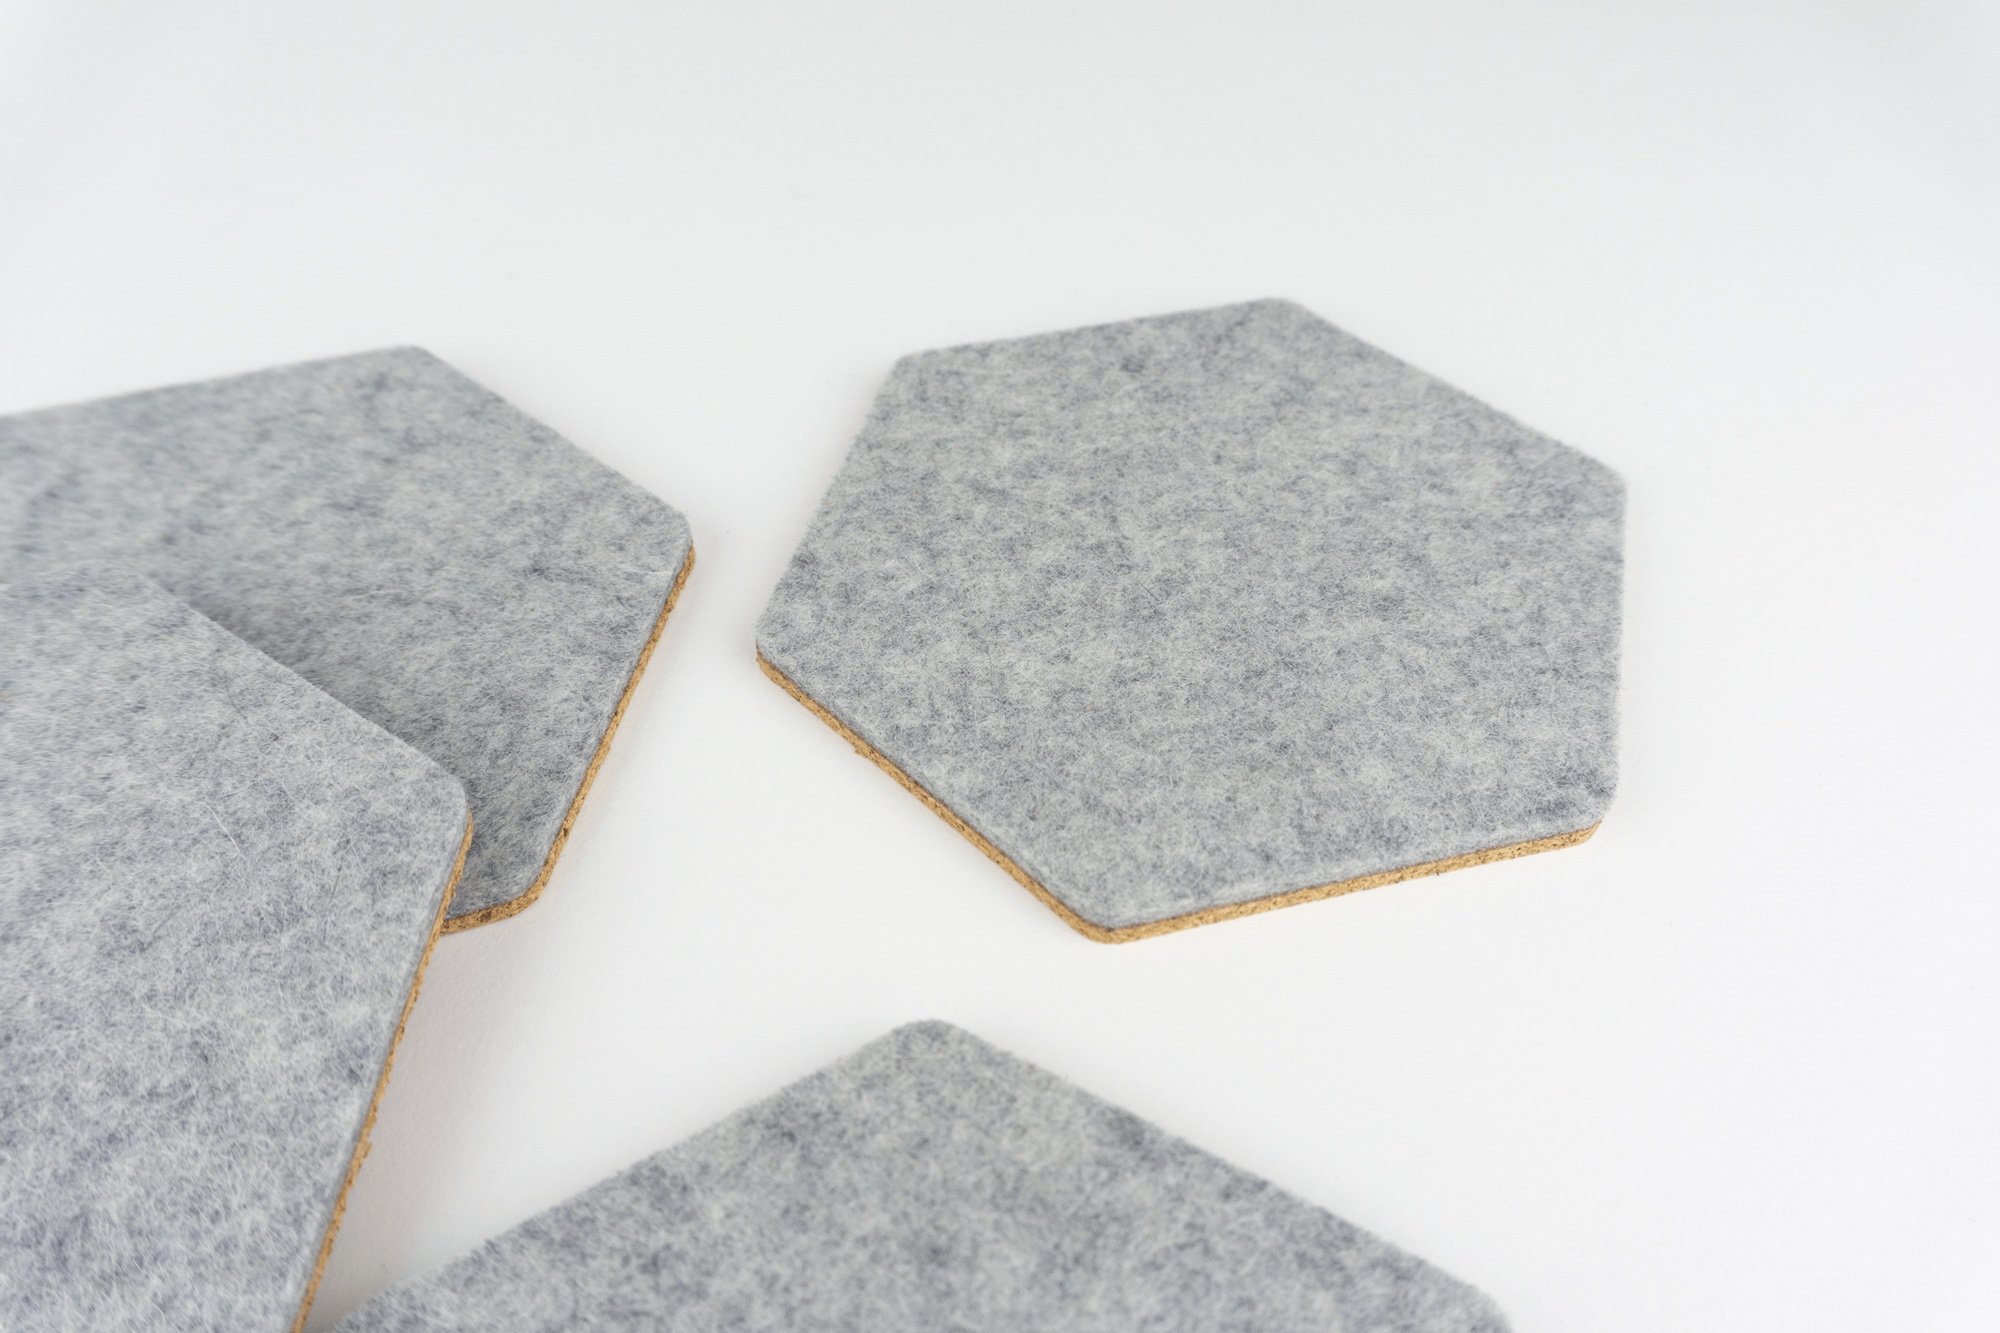 A close up of 4 grey wool felt hexagon coasters shown on a white desk spread out.